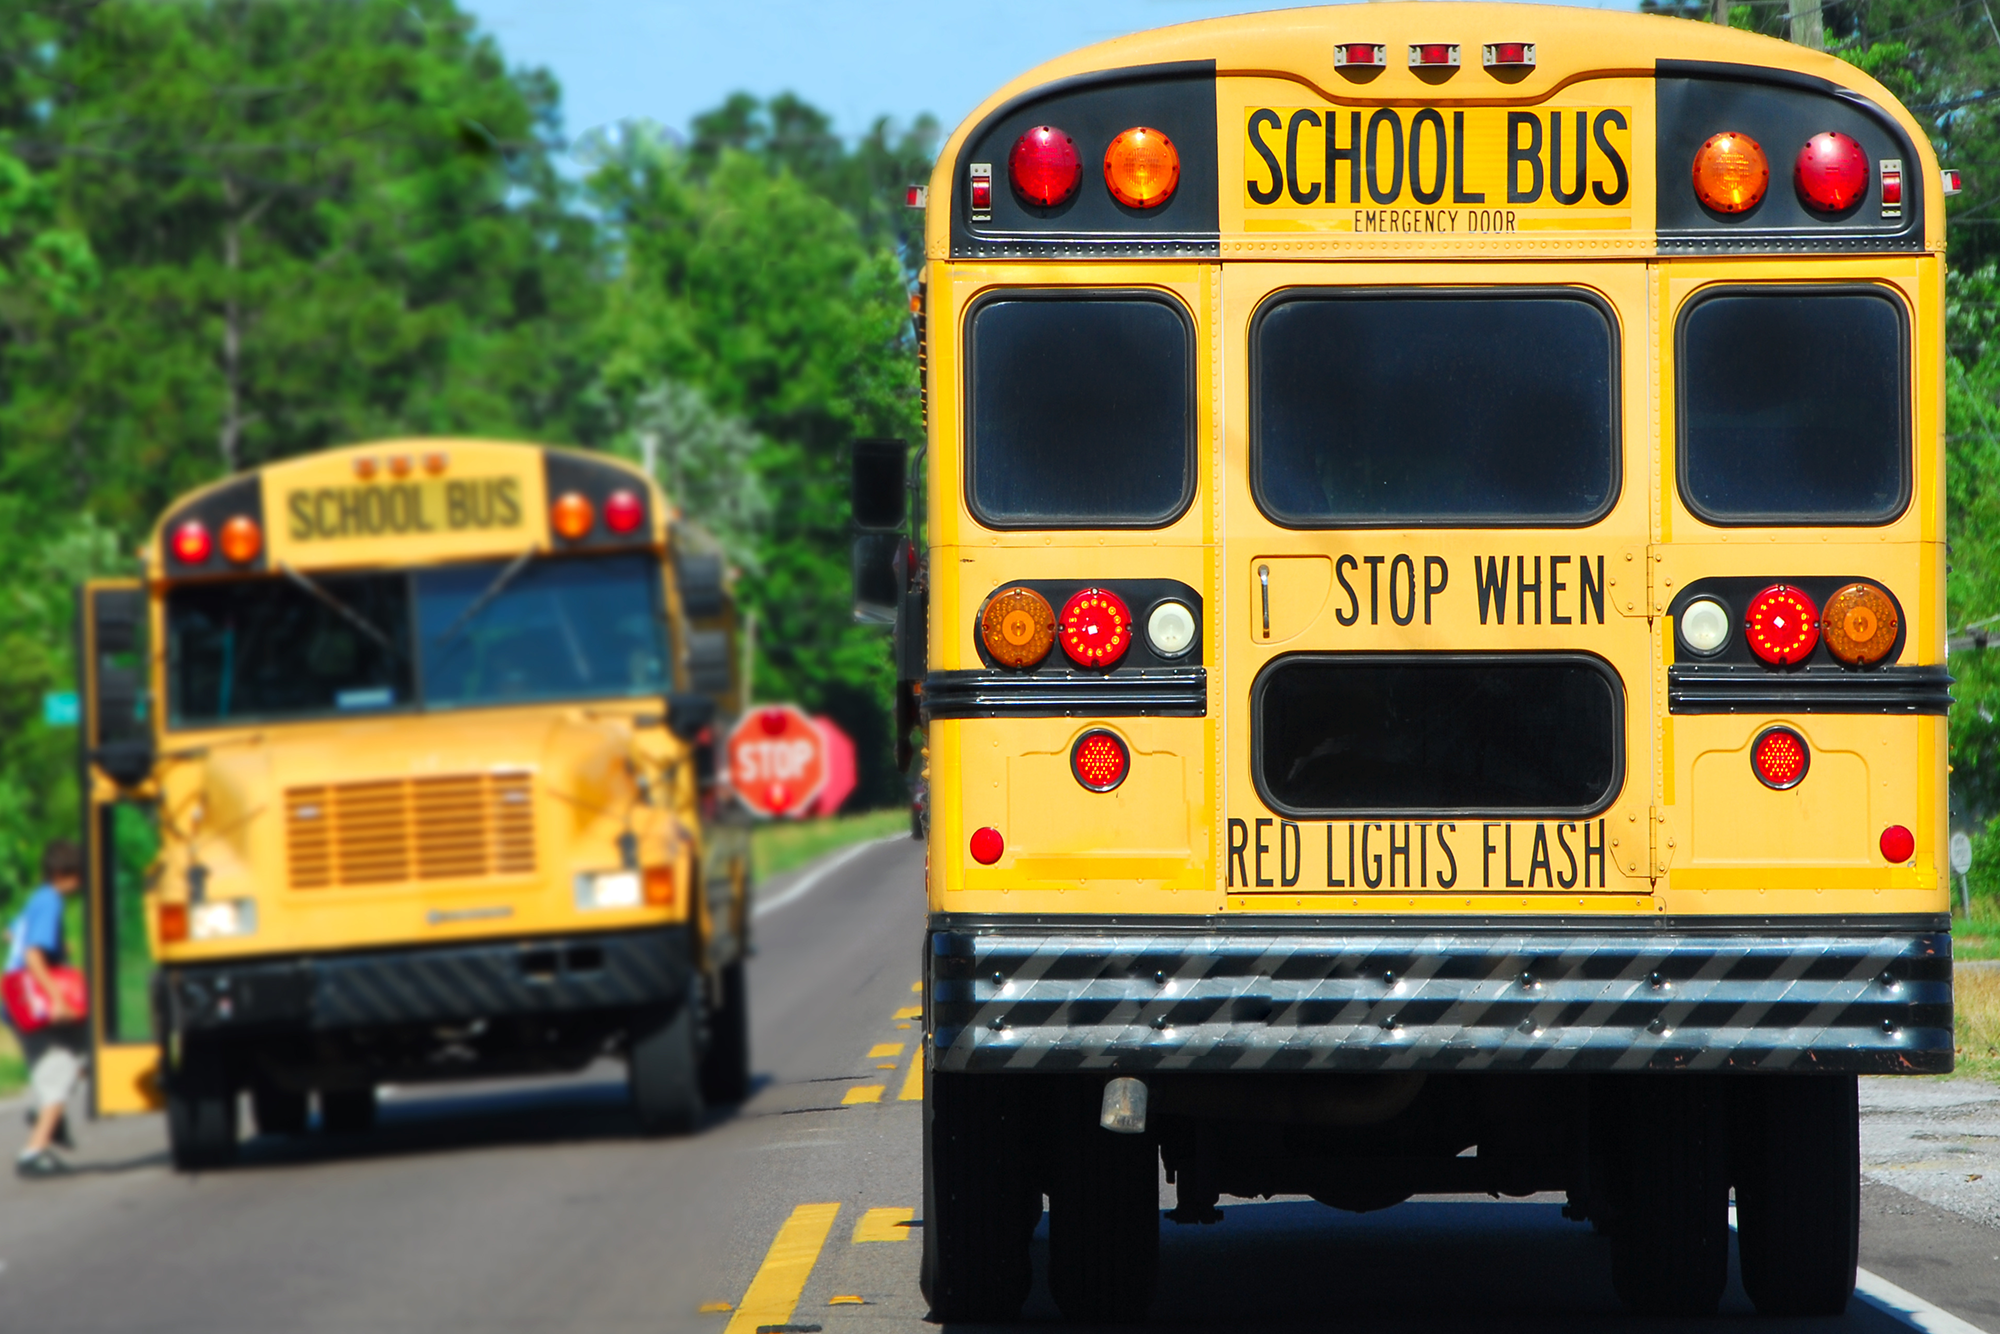 Safeguarding School Transportation - Two school buses facing opposite directions, with the stop lights flashing.